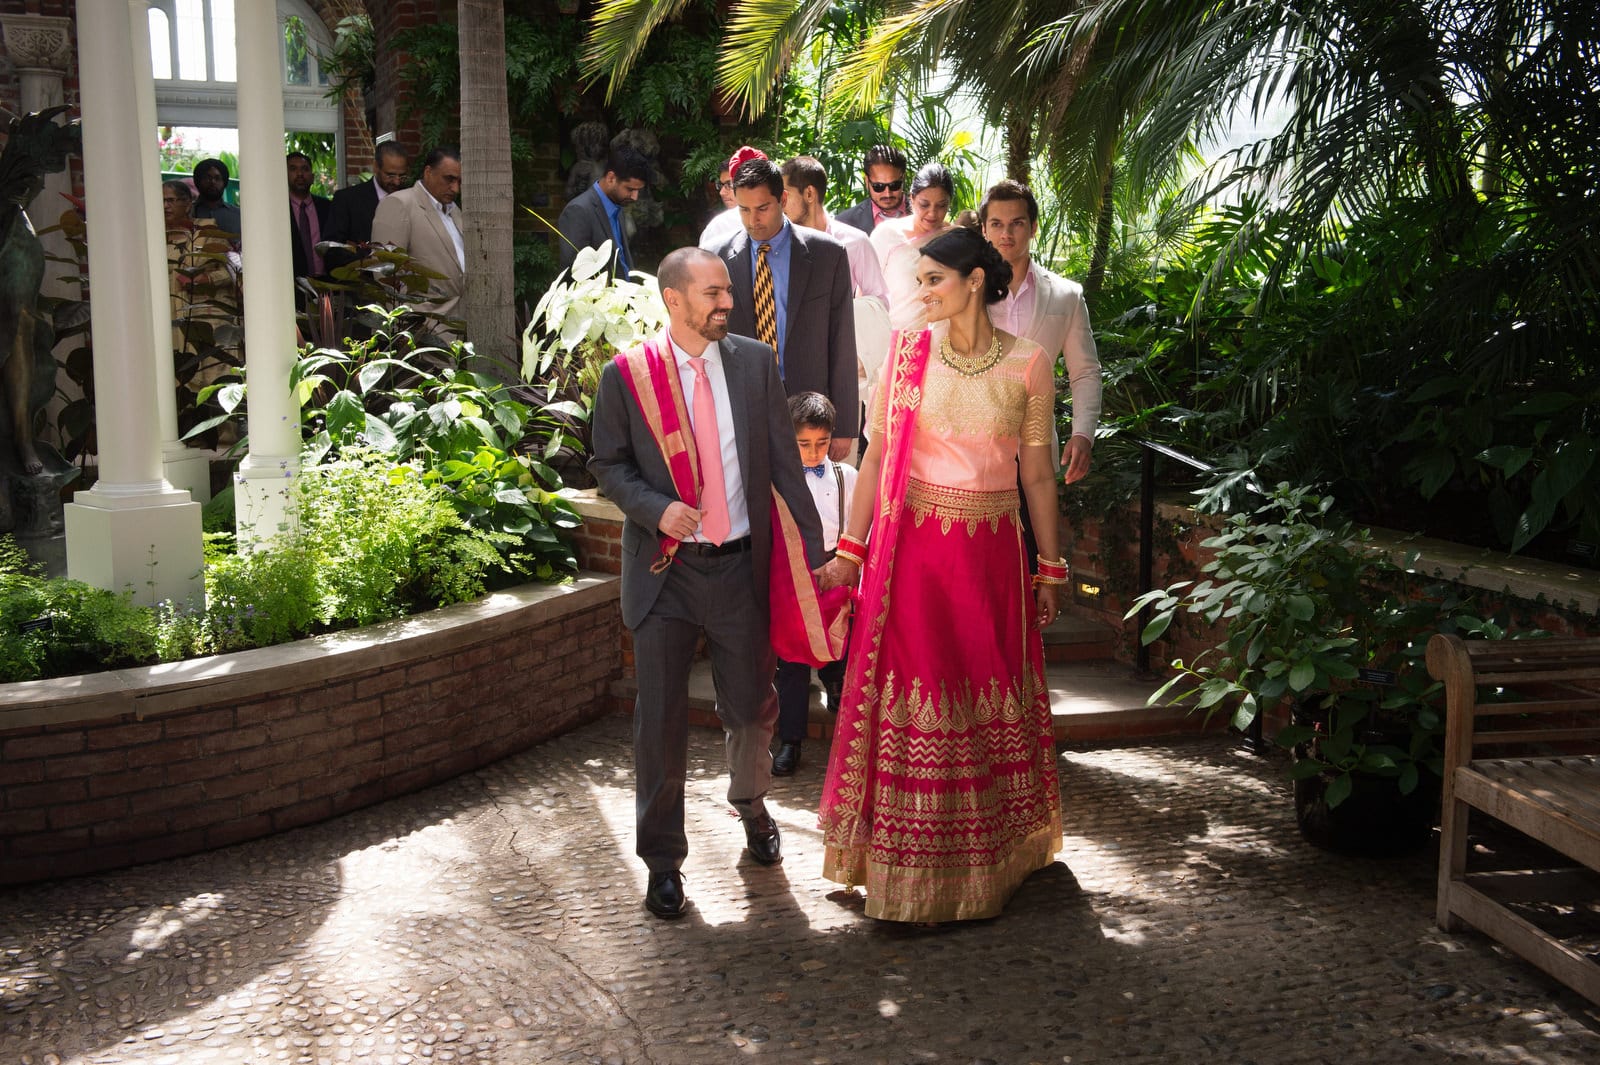 A groom wearing a grey suit and pink tie walks with his chartreuse and gold wearing bride as they lead their guests through a lush room in a conservatory during their Renaissance Phipps South Asian Wedding.